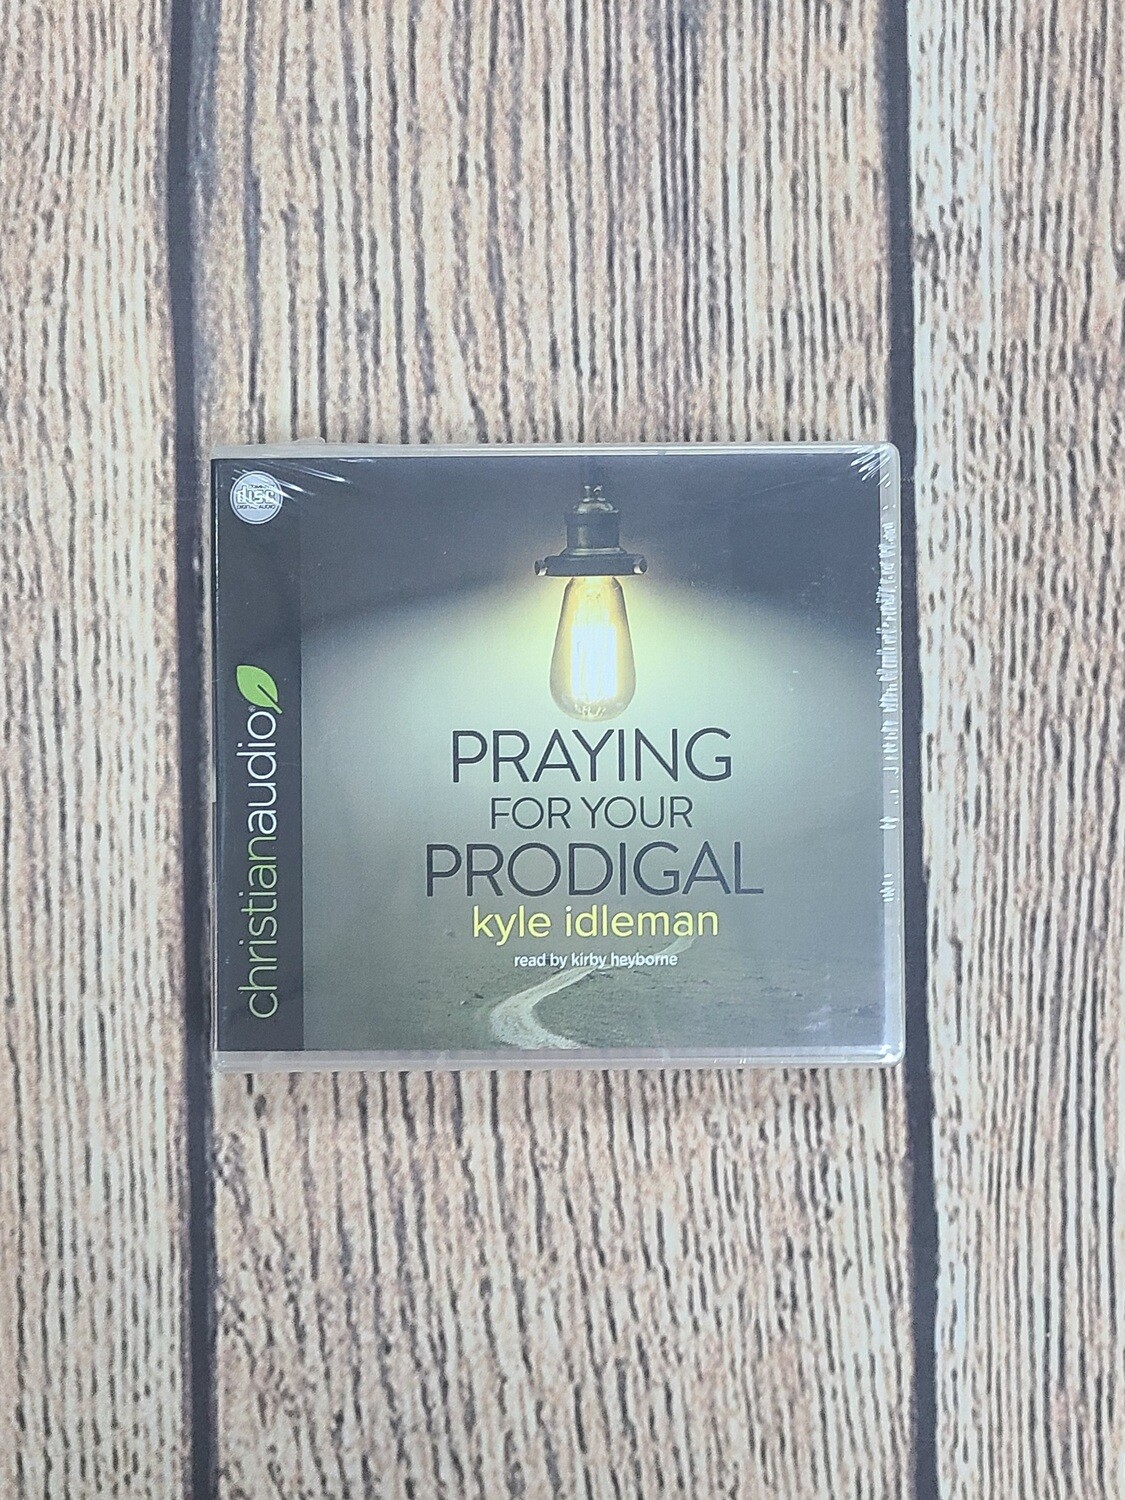 Praying for Your Prodigal by Kyle Idleman Audiobook